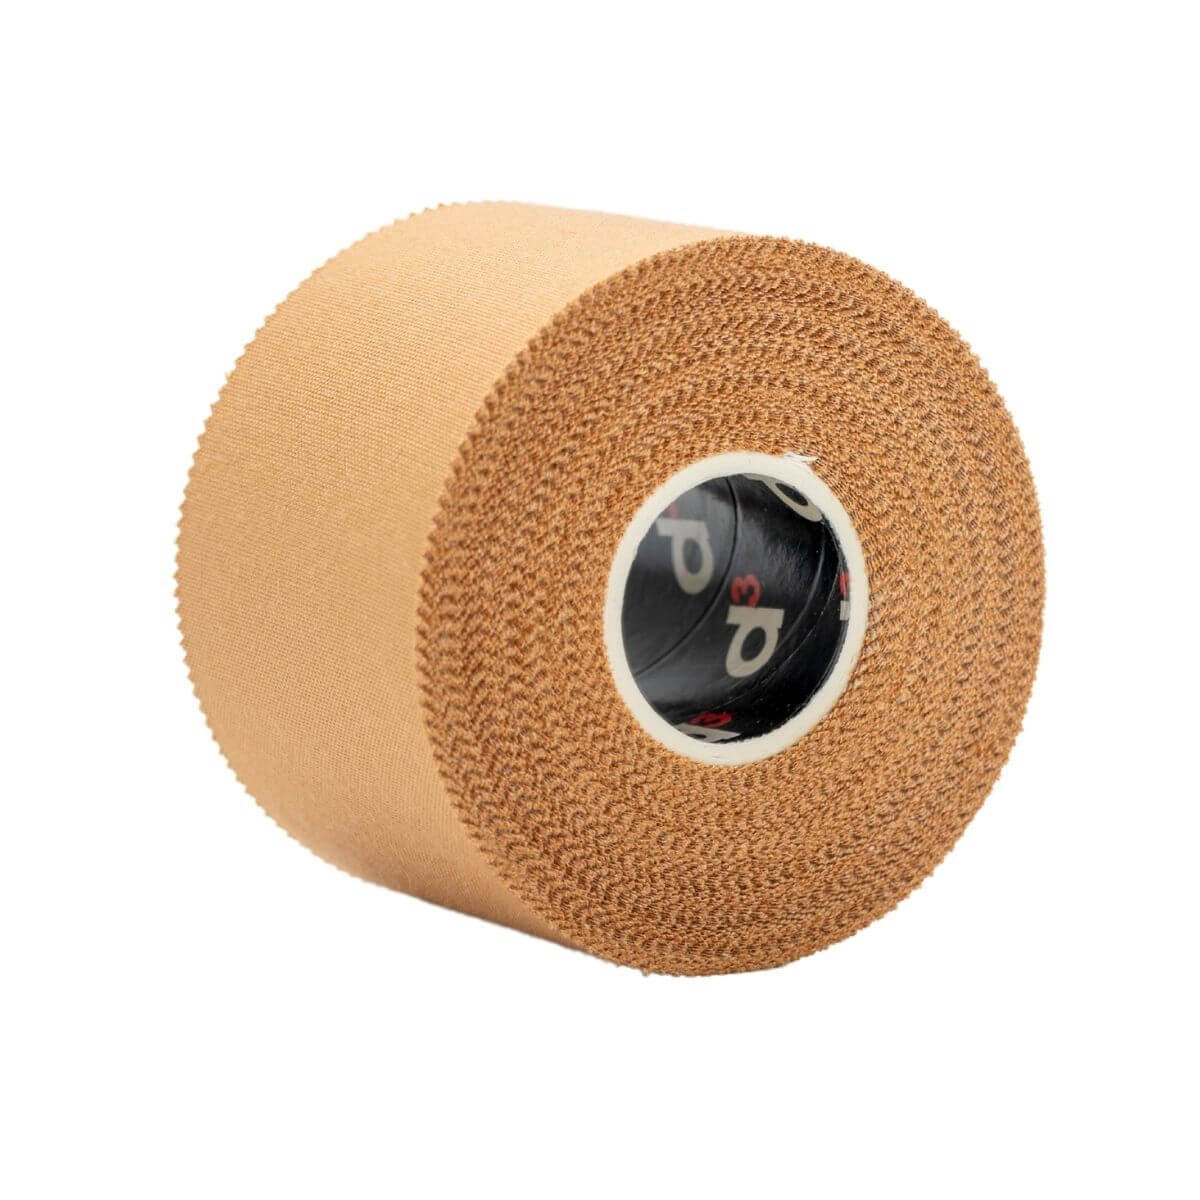 R.I.C.E.D Neoprene Compression Strap - d3 Tape - Strapping Tapes, Recovery  Products, Sprays - K Tape, Rigid Tape, Wholesale Available